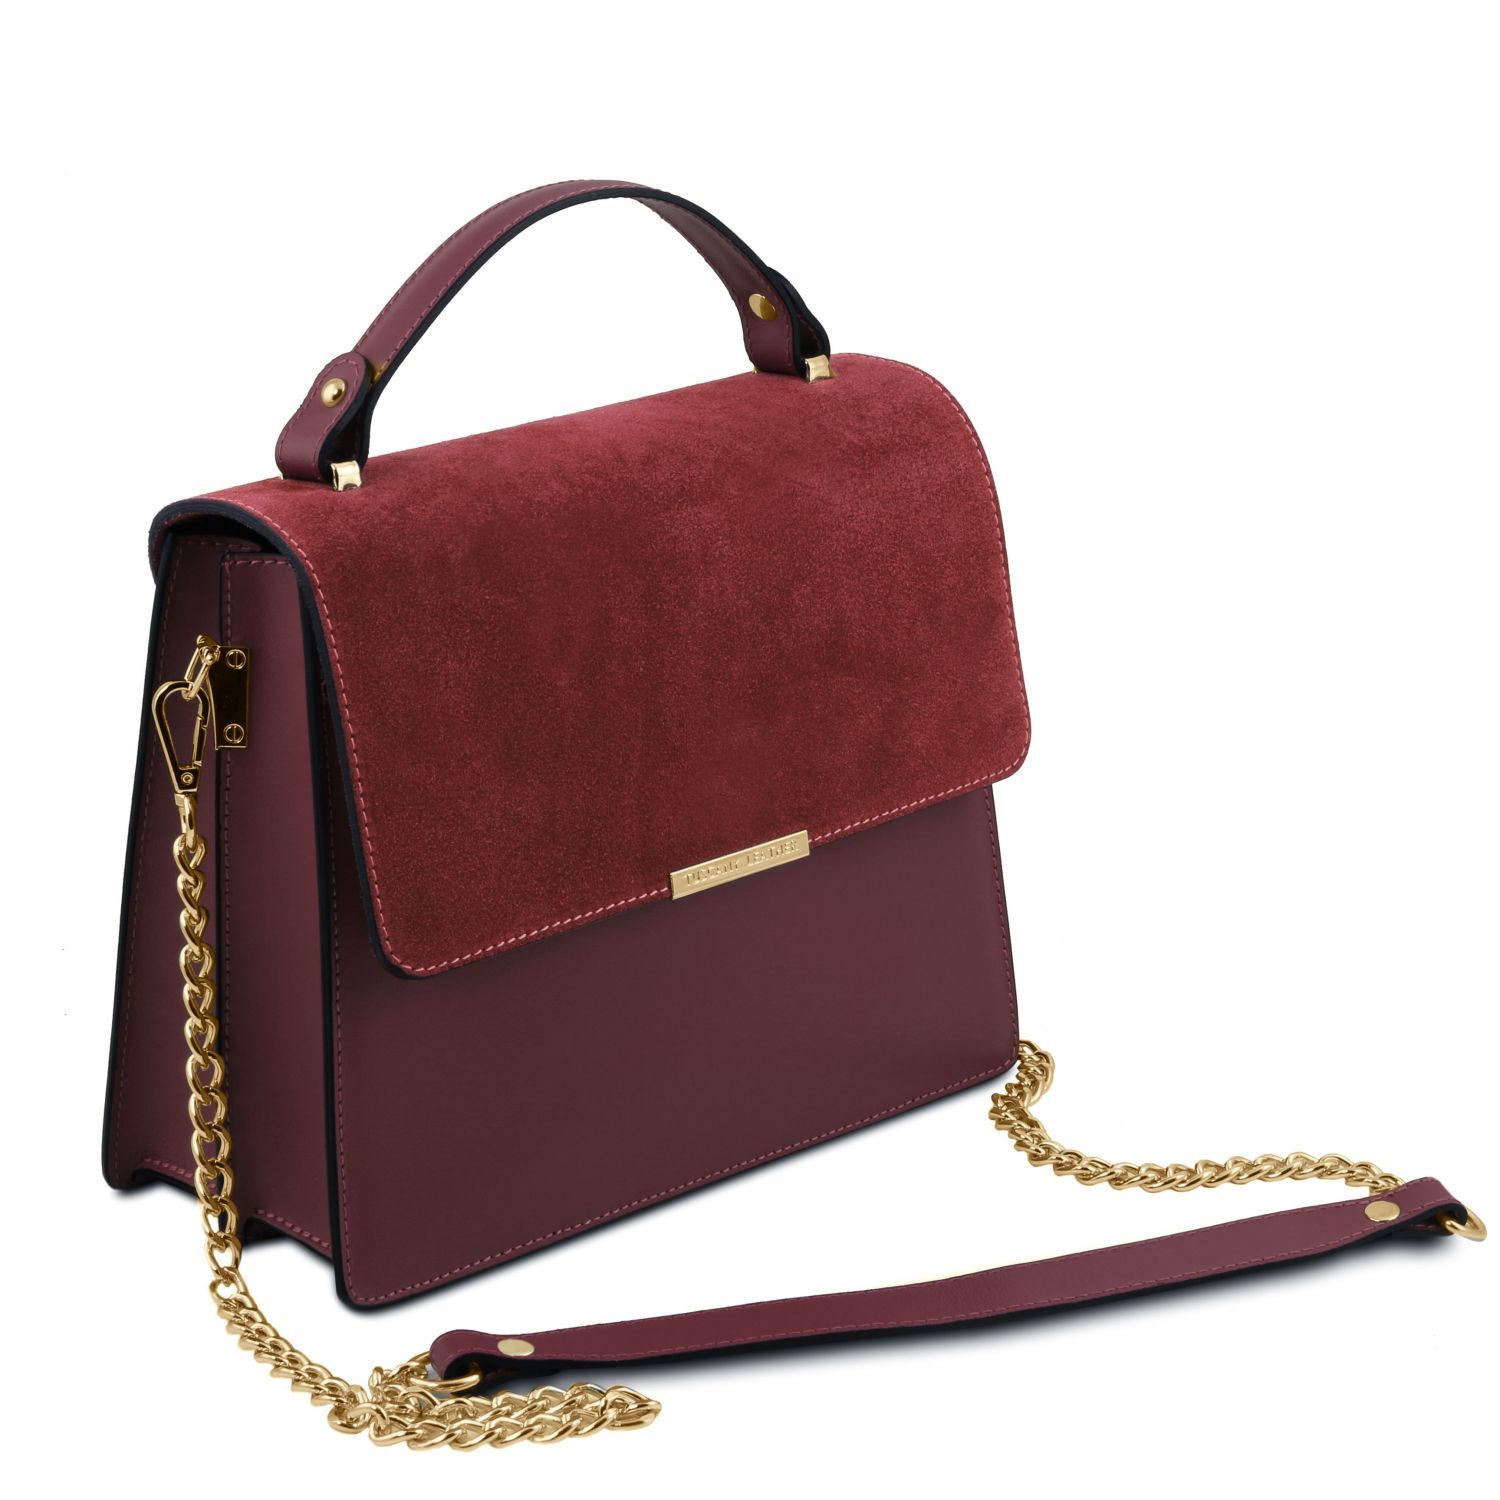 Irene Leather Handbag With Chain Strap Bordeaux TL141745